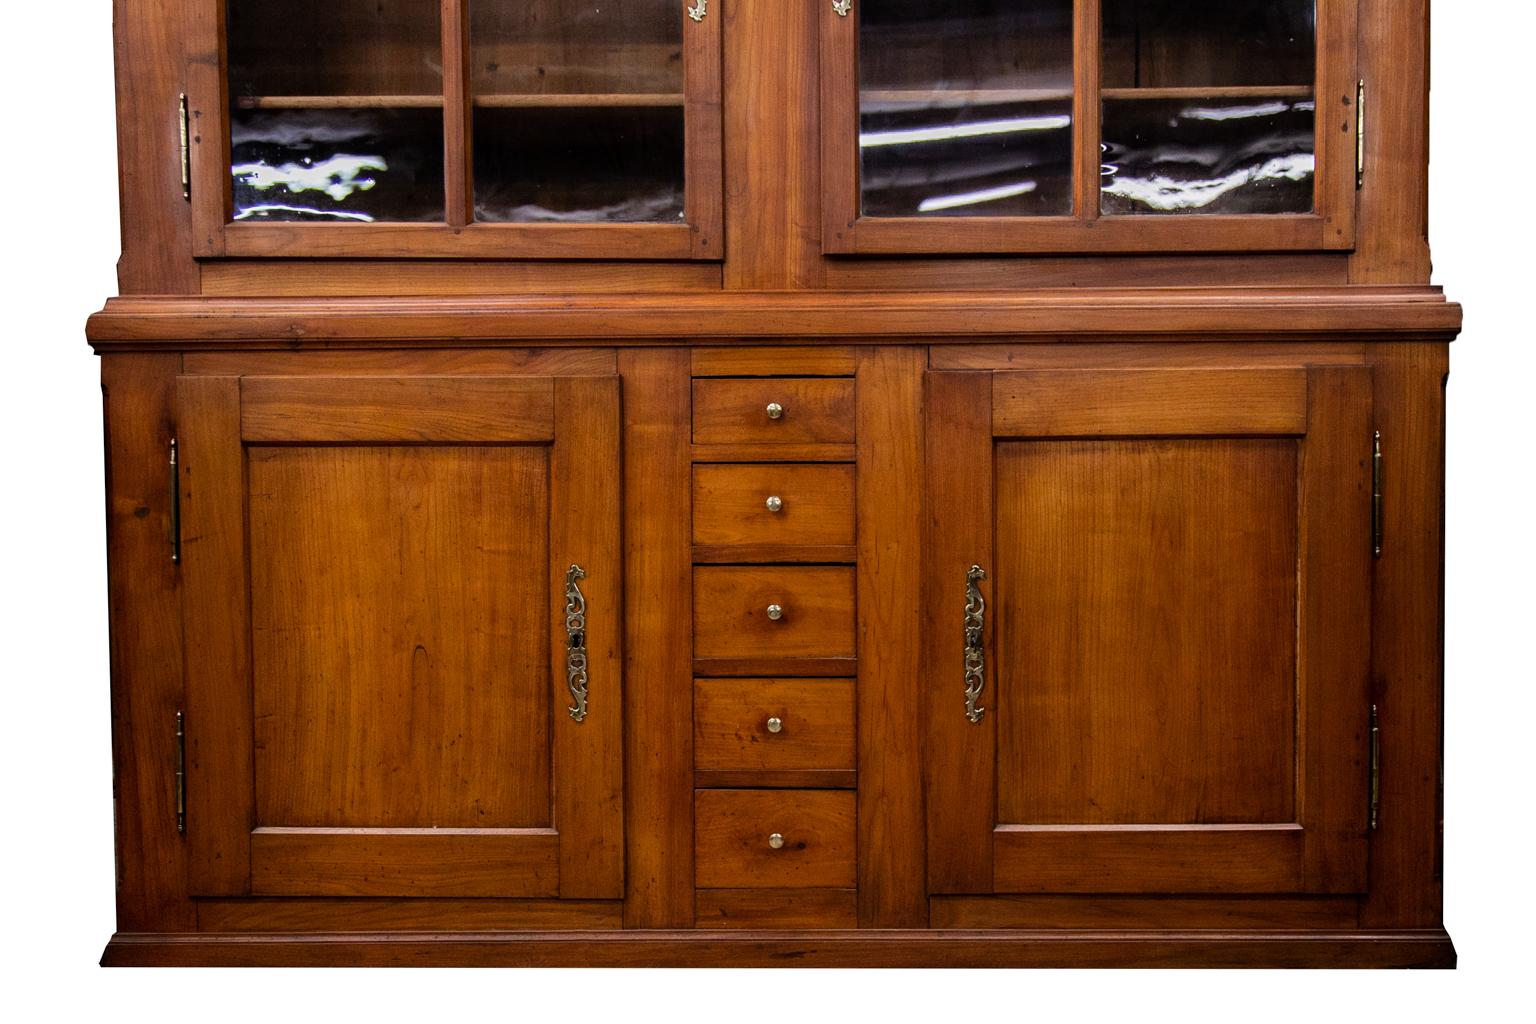 This cherry cabinet has the original blown glass panes and double peg construction. Each side of the top half has three adjustable shelves. The upper and lower doors have separate original locks that all have the original working keys. The lower